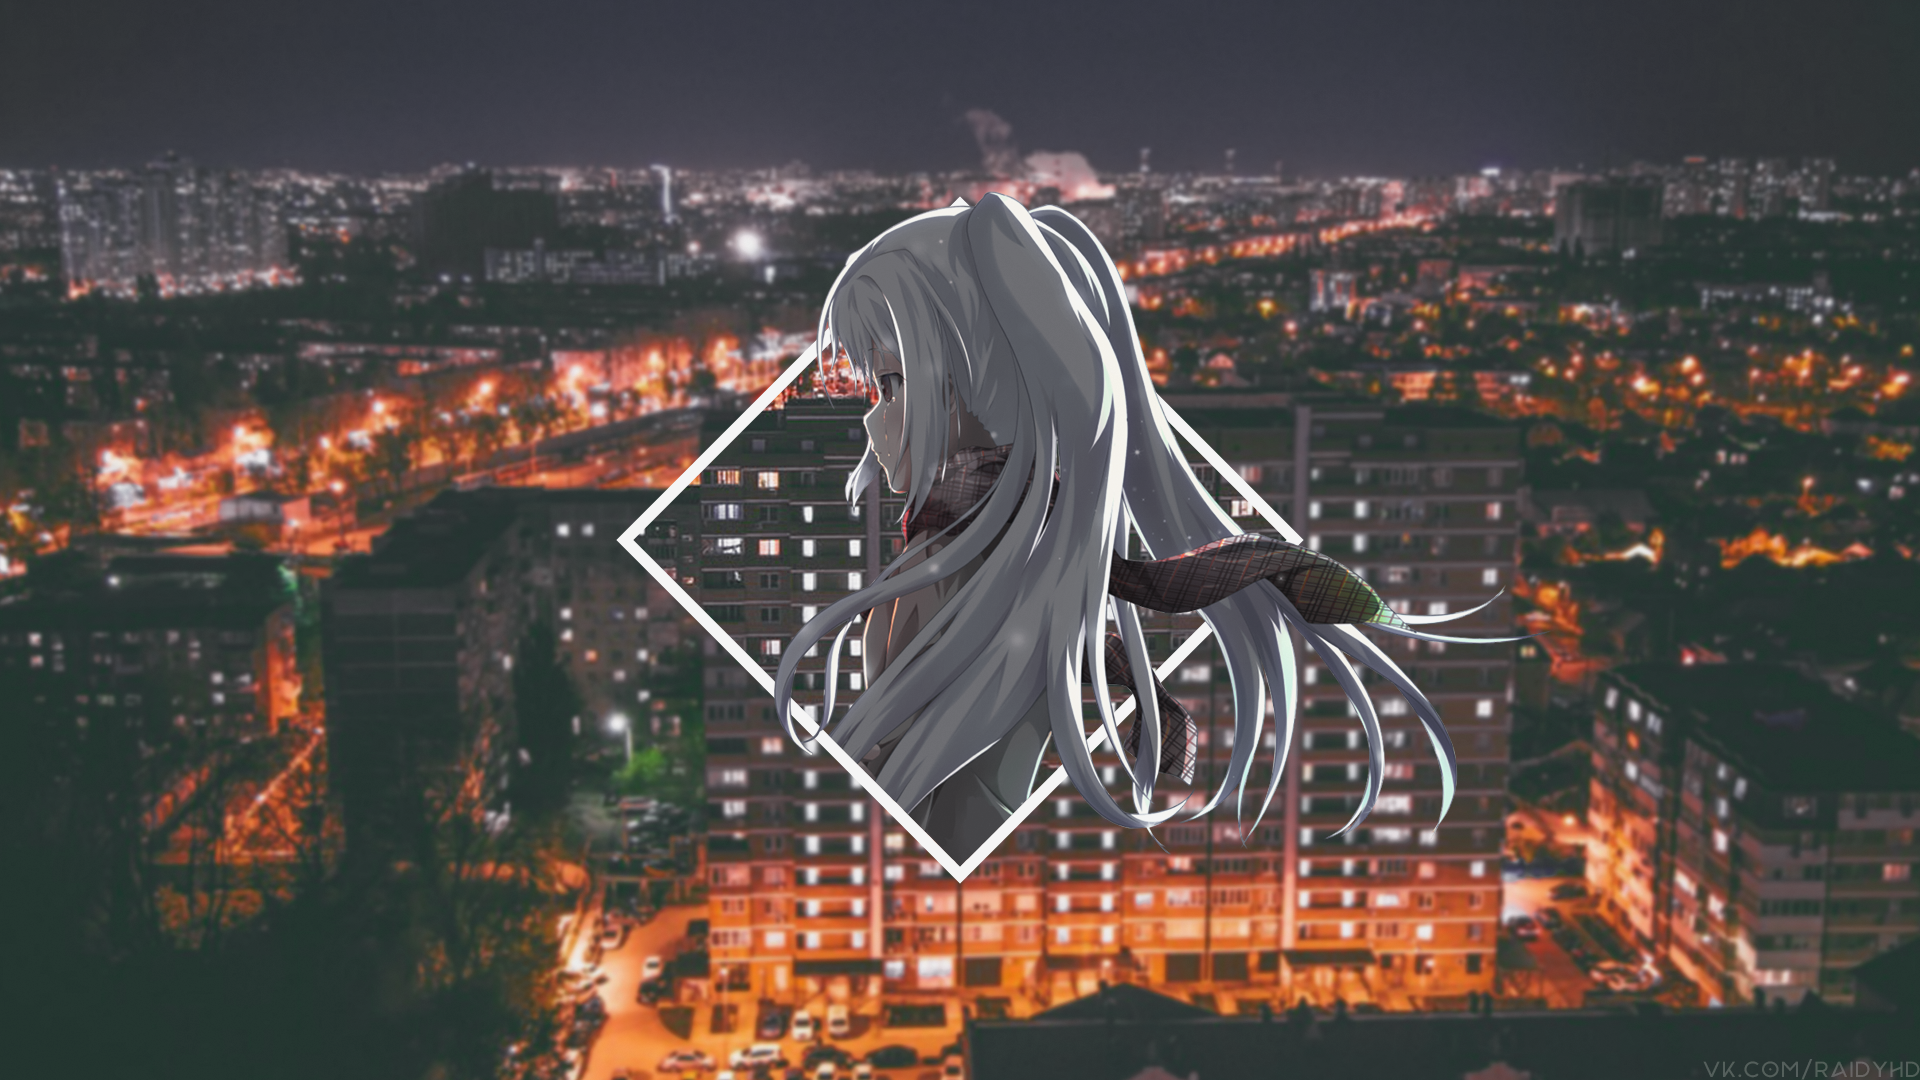 Anime Anime Girls Picture In Picture Plastic Memories 1920x1080